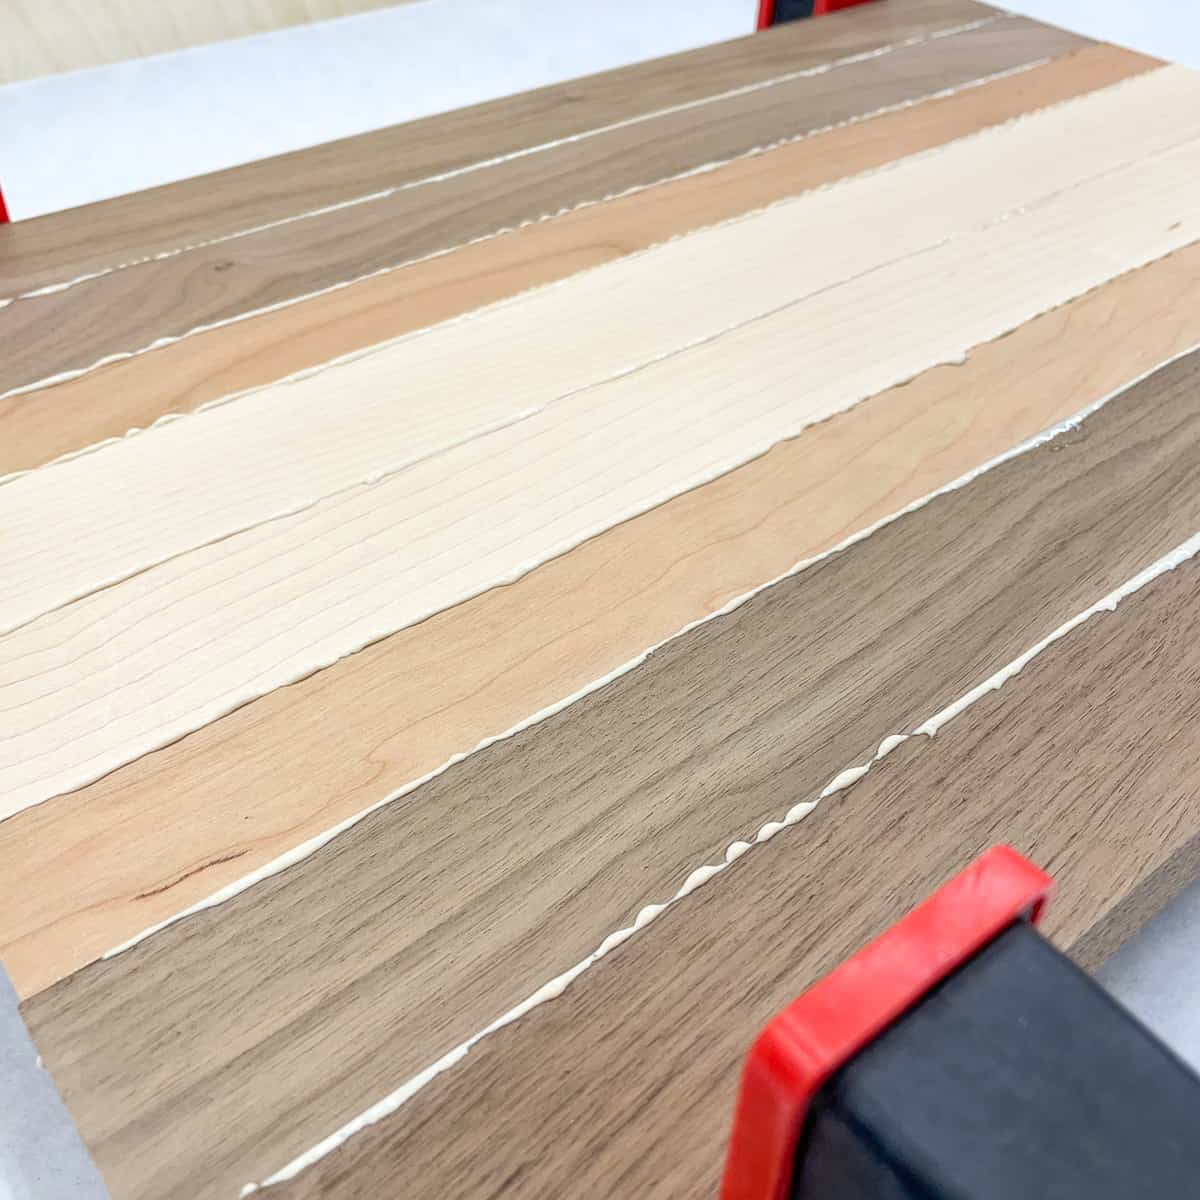 wood glue squeeze out between joints of cutting board